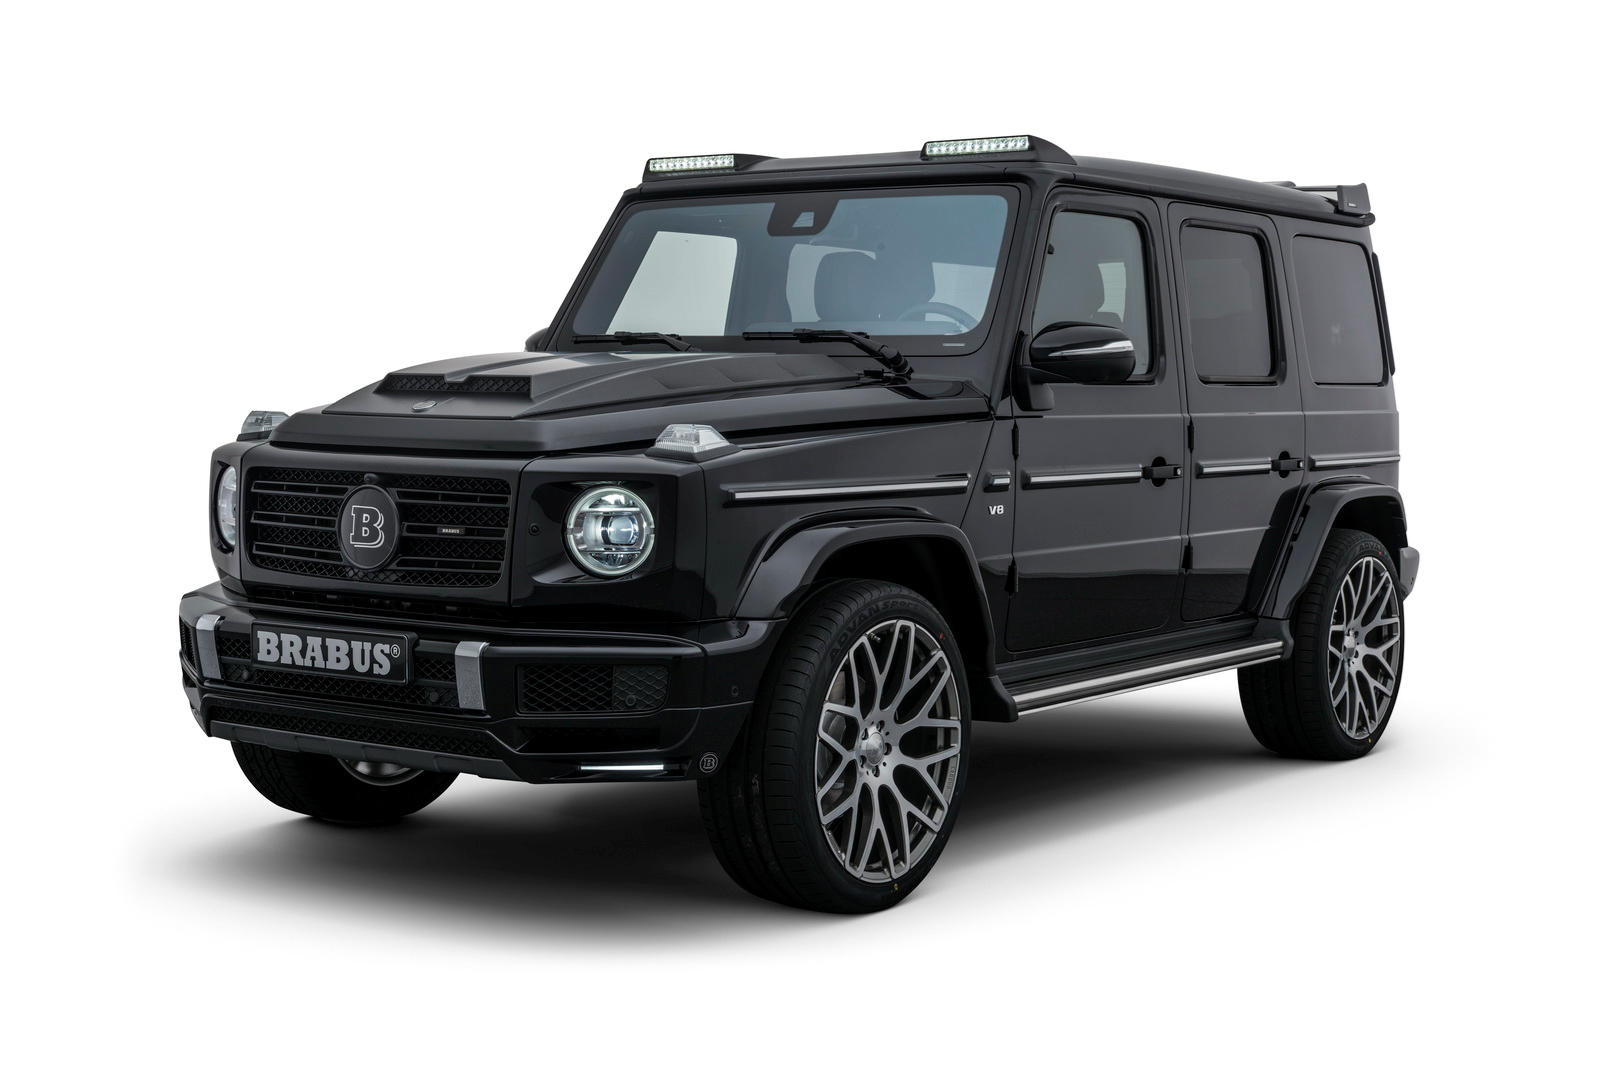 Brabus Tunes the 2019 Mercedes-Benz G-Class to Nearly 500 HP